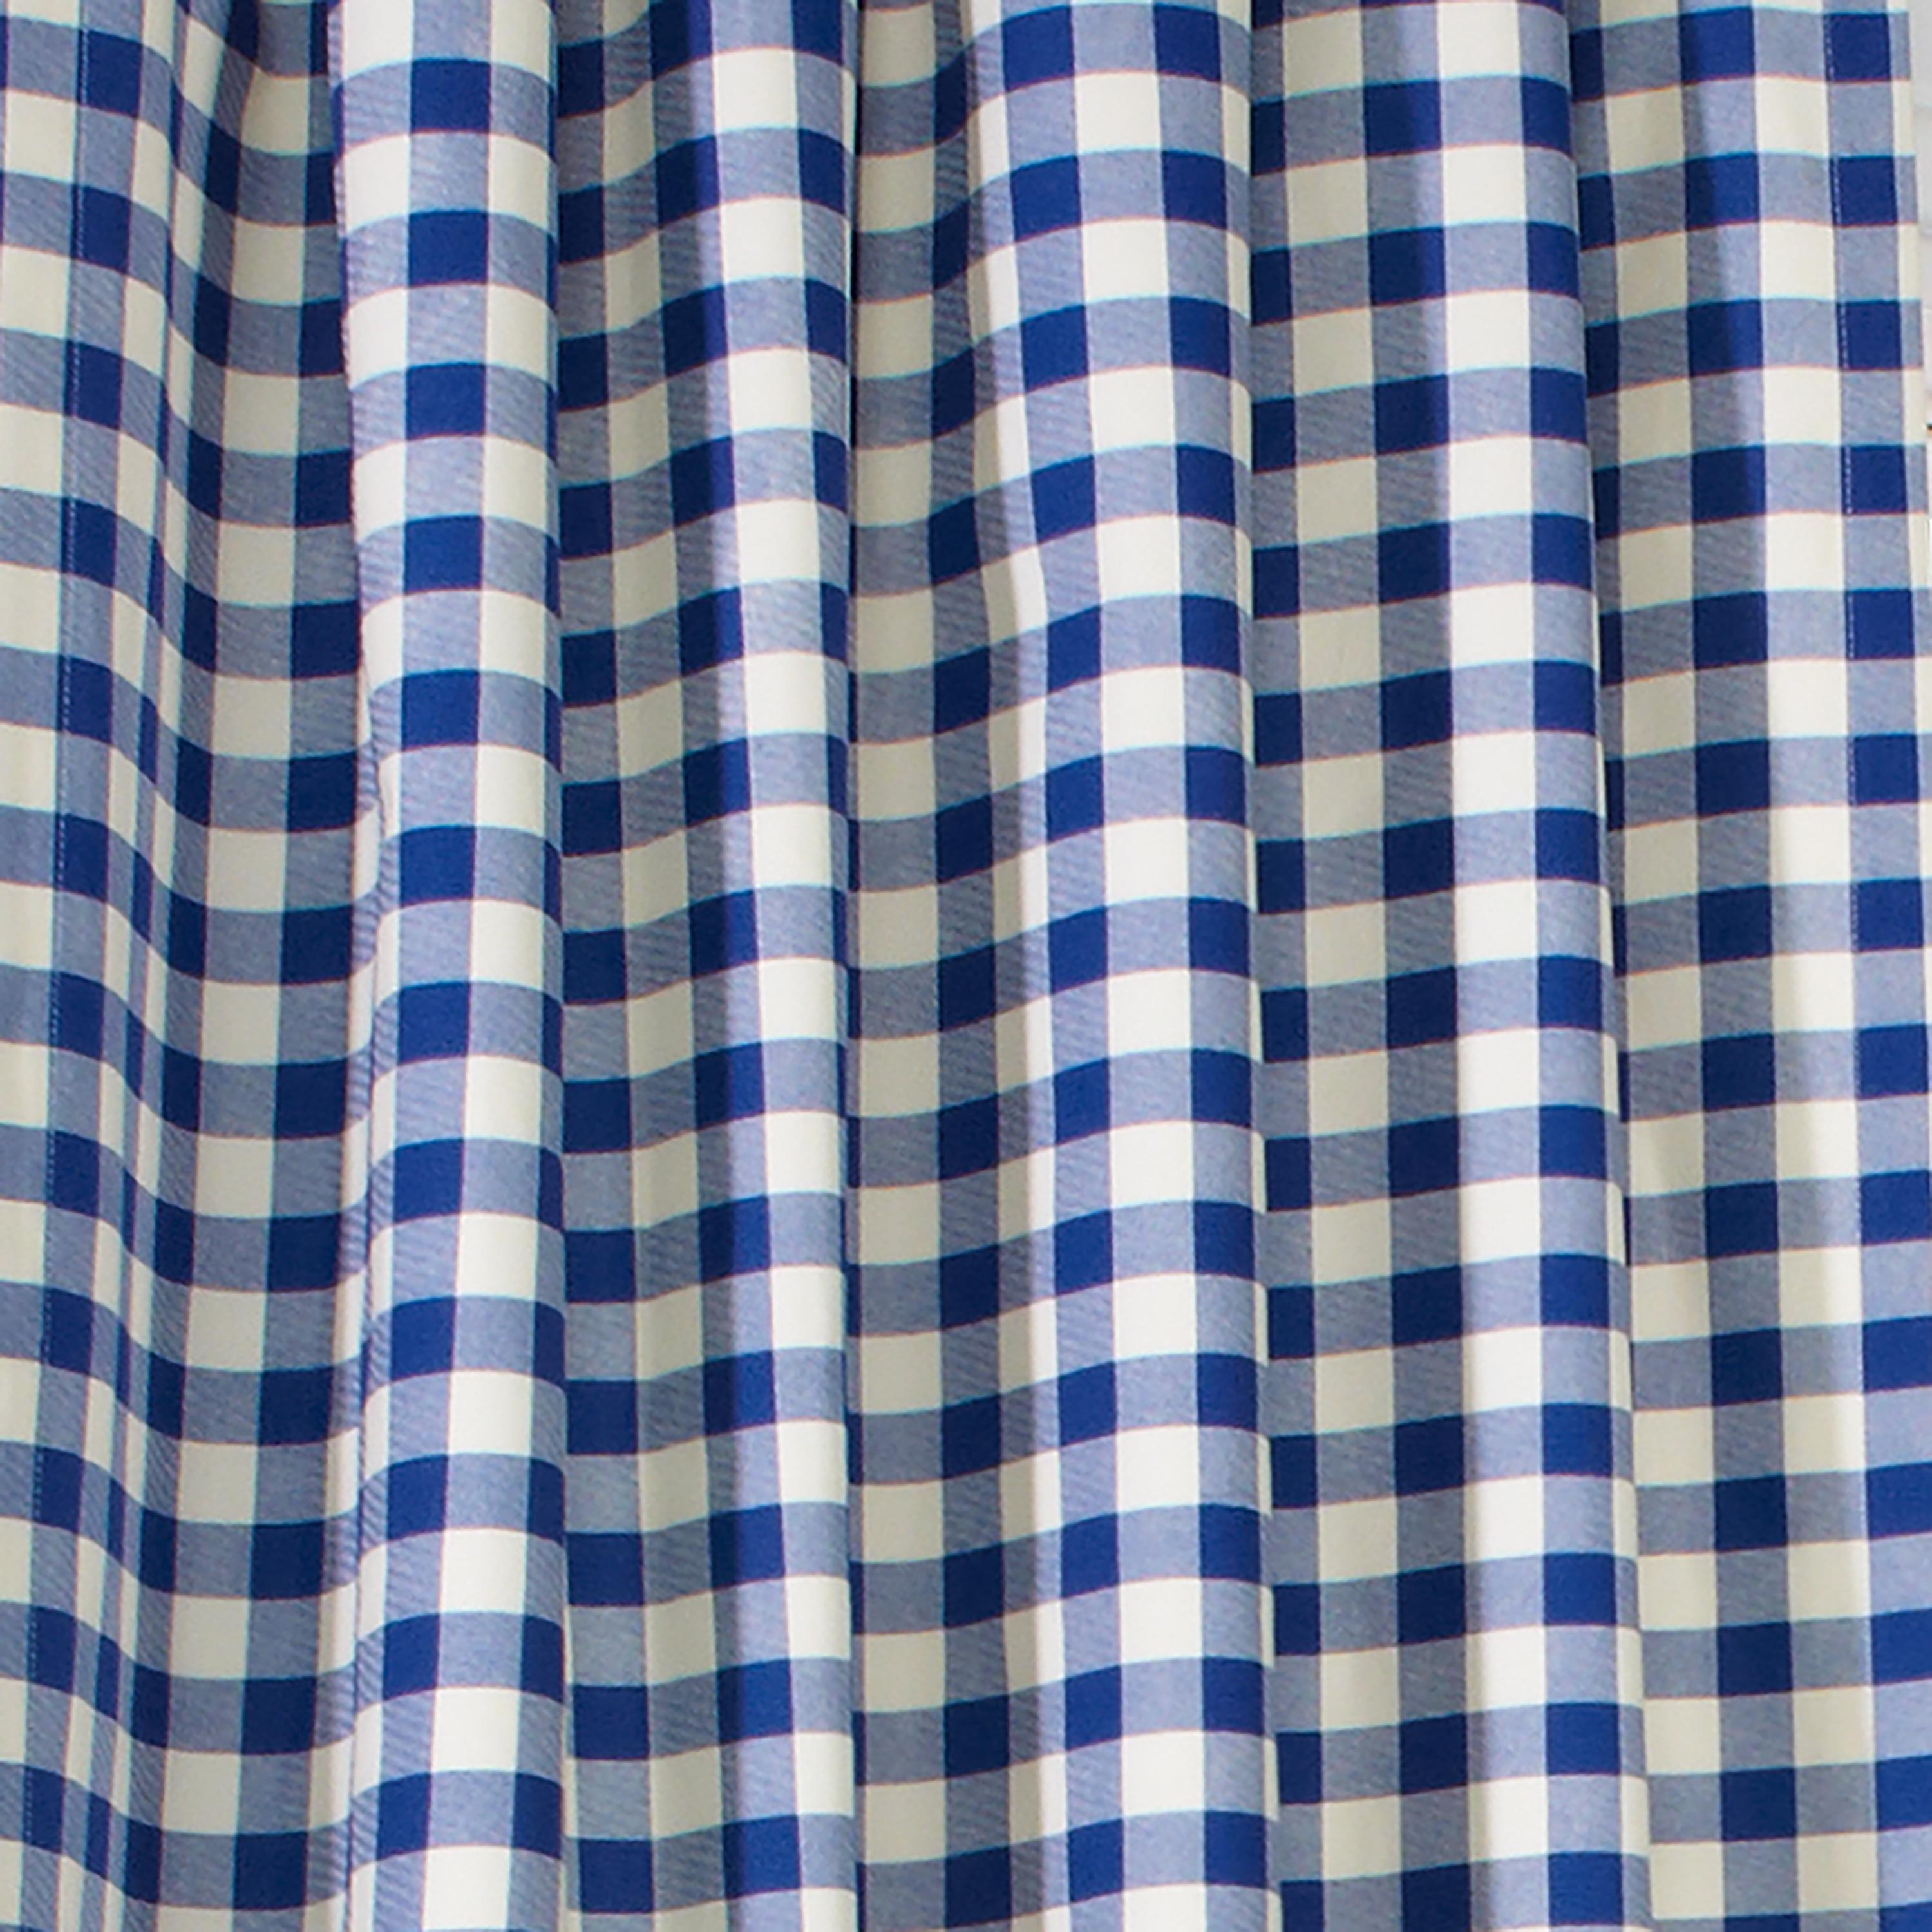 Image of 15"L x 40"W Thermalogic Check Tab-Top Valance Curtain, in Blue